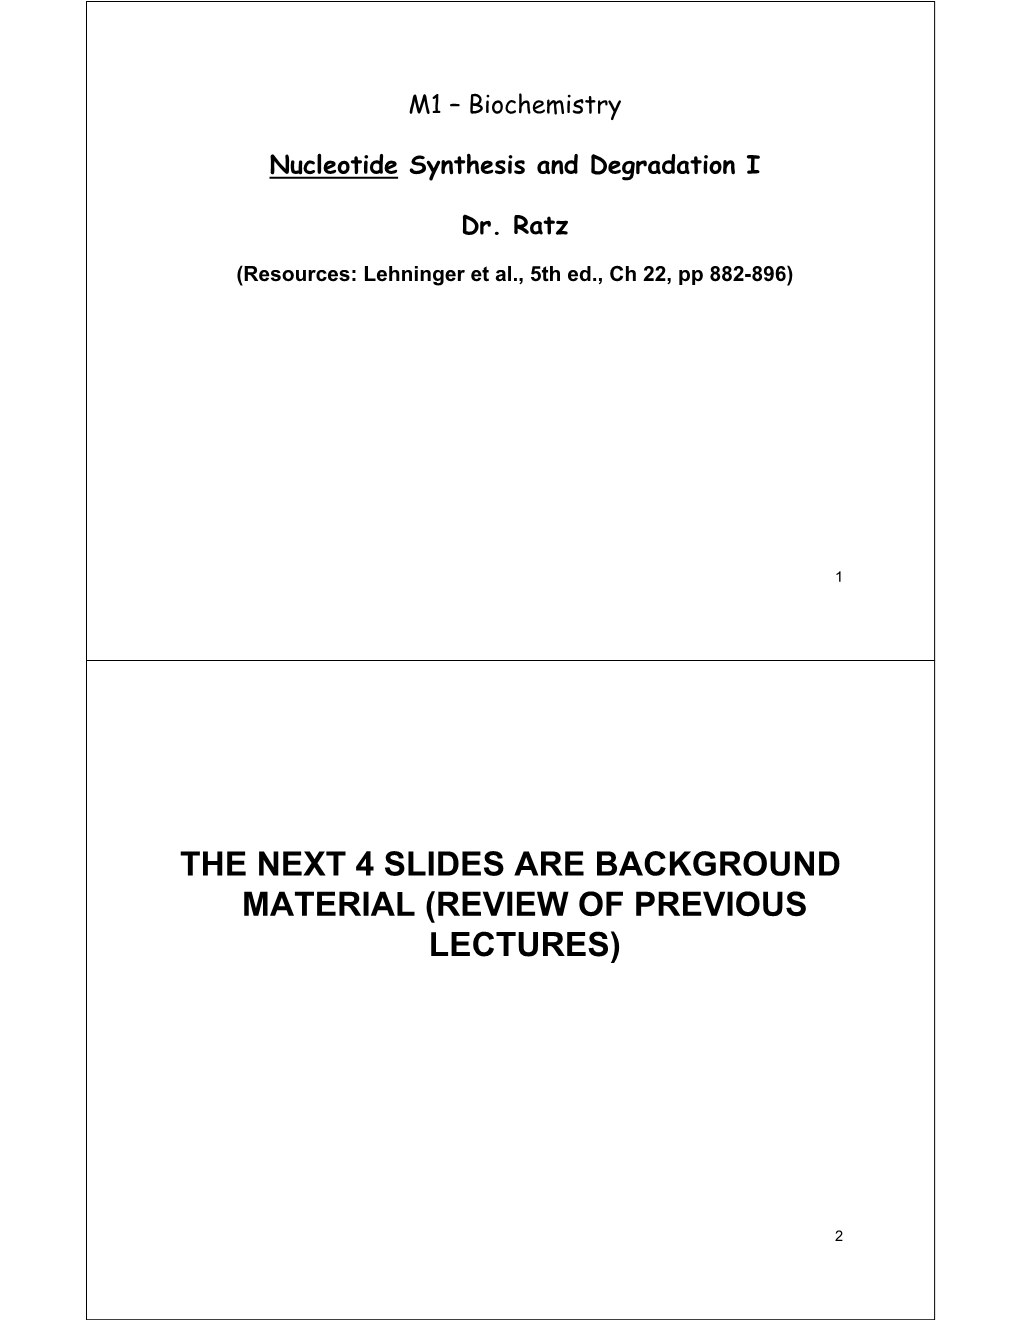 The Next 4 Slides Are Background Material (Review of Previous Lectures)